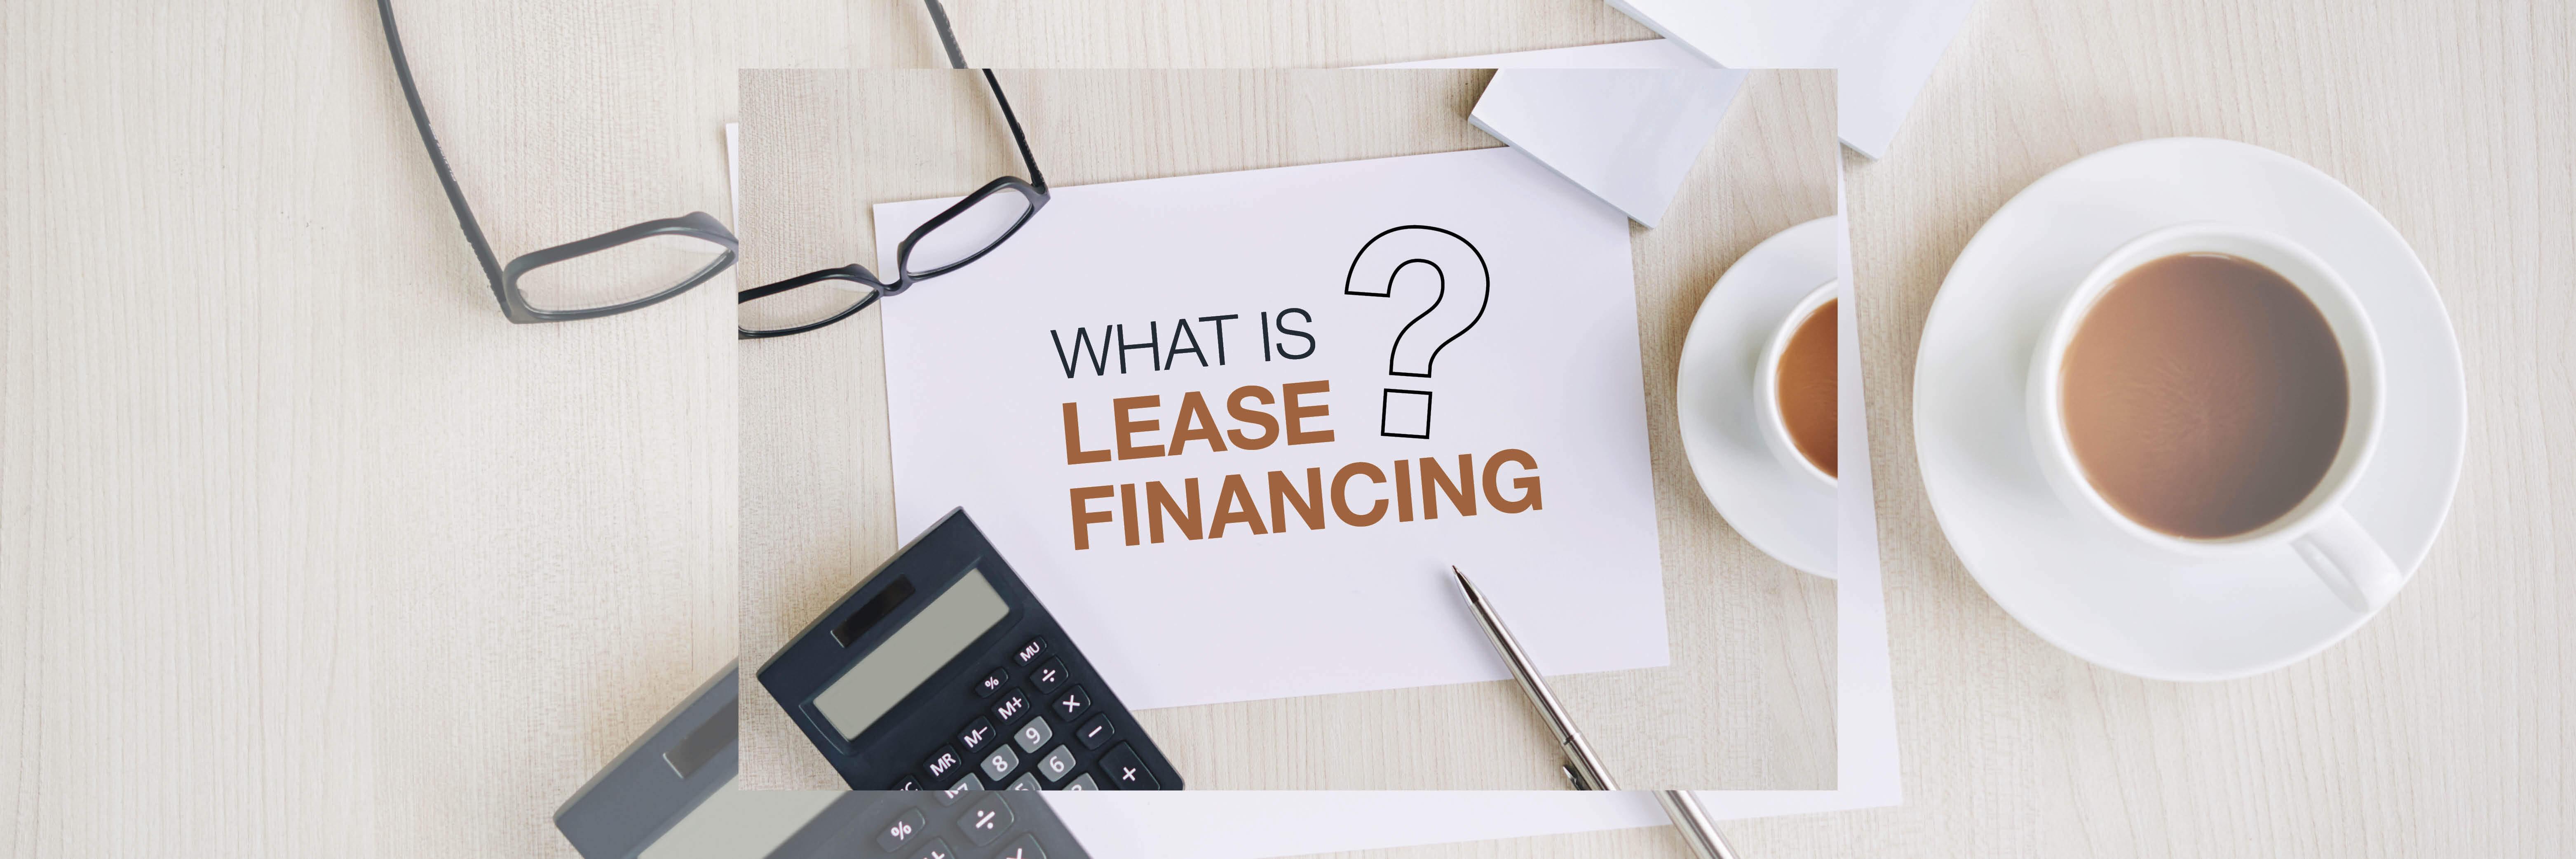 What is Lease Financing?